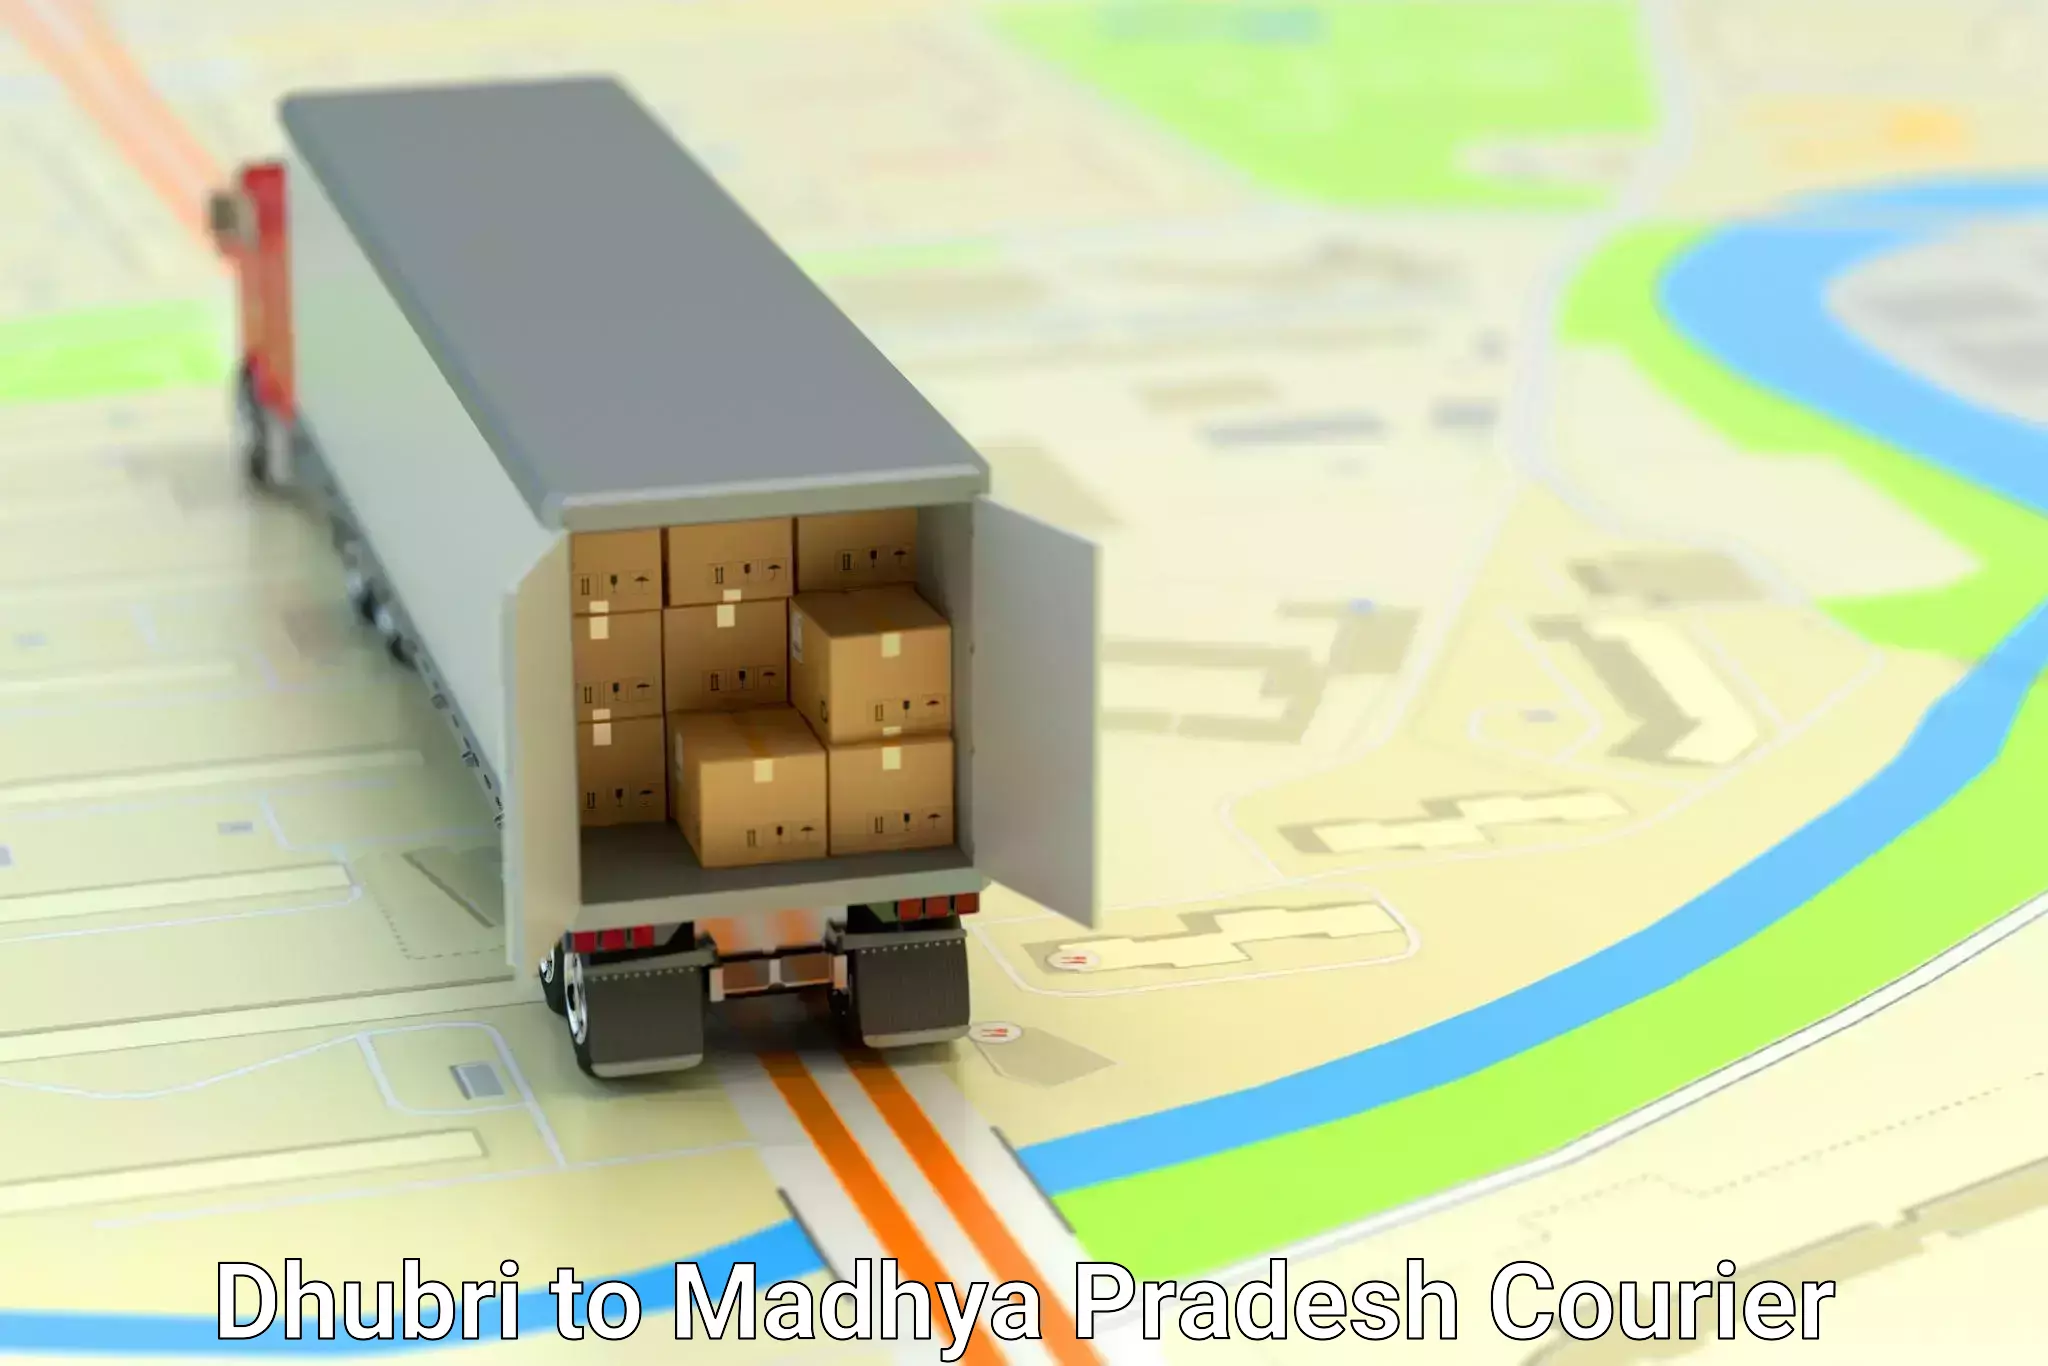 Customer-friendly courier services in Dhubri to Madhya Pradesh